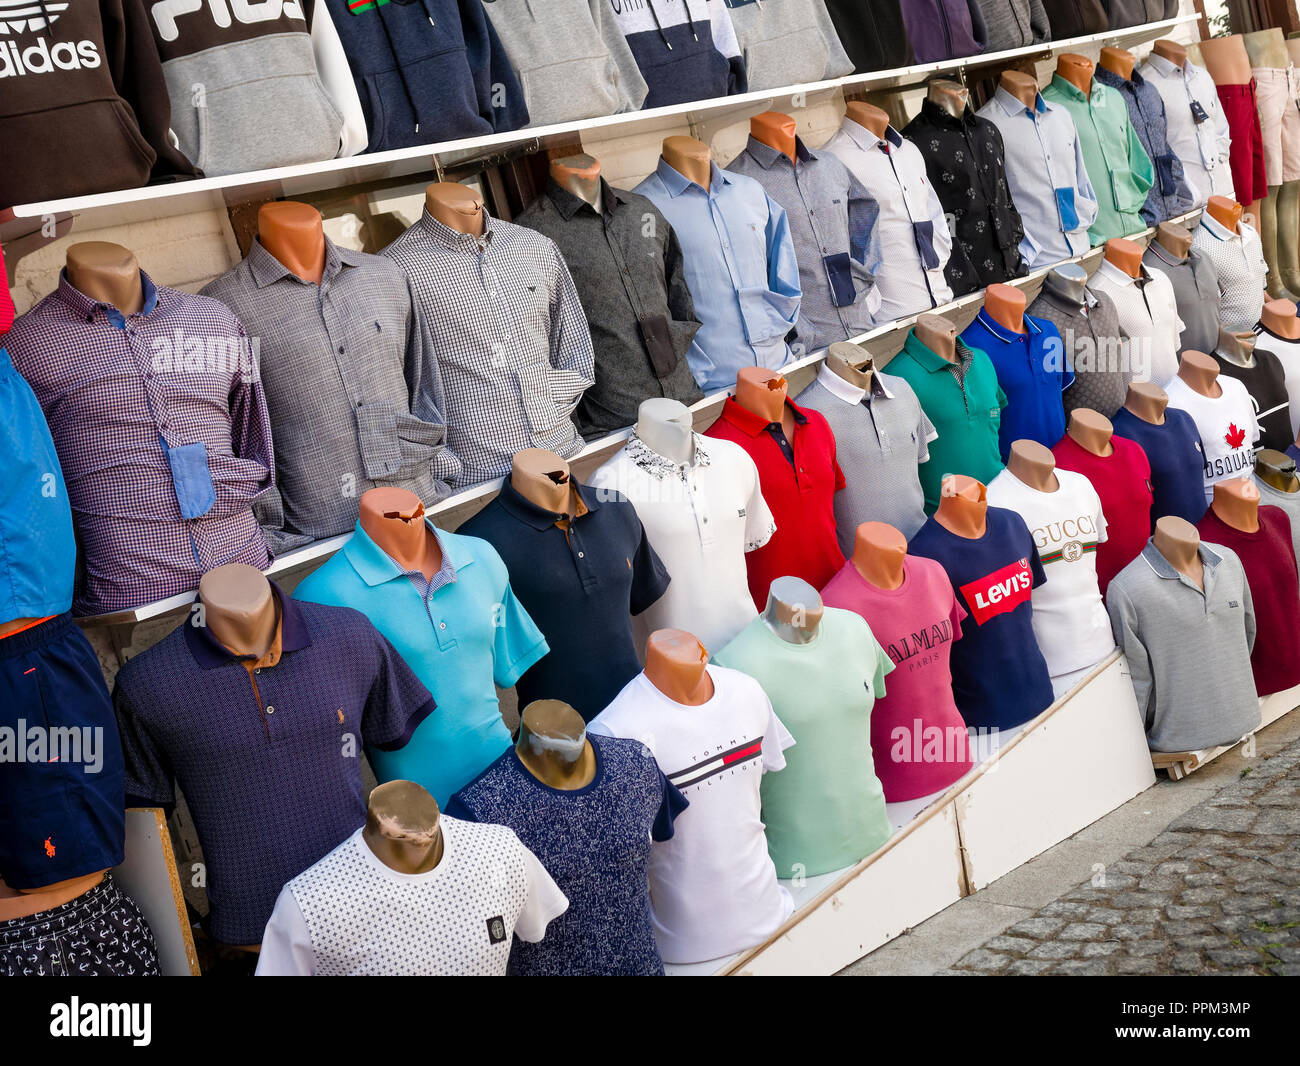 counterfeit-or-fake-designer-clothing-for-sale-outside-shop-in-the-busy-harbour-area-of-kalkan-PPM3MP.jpg